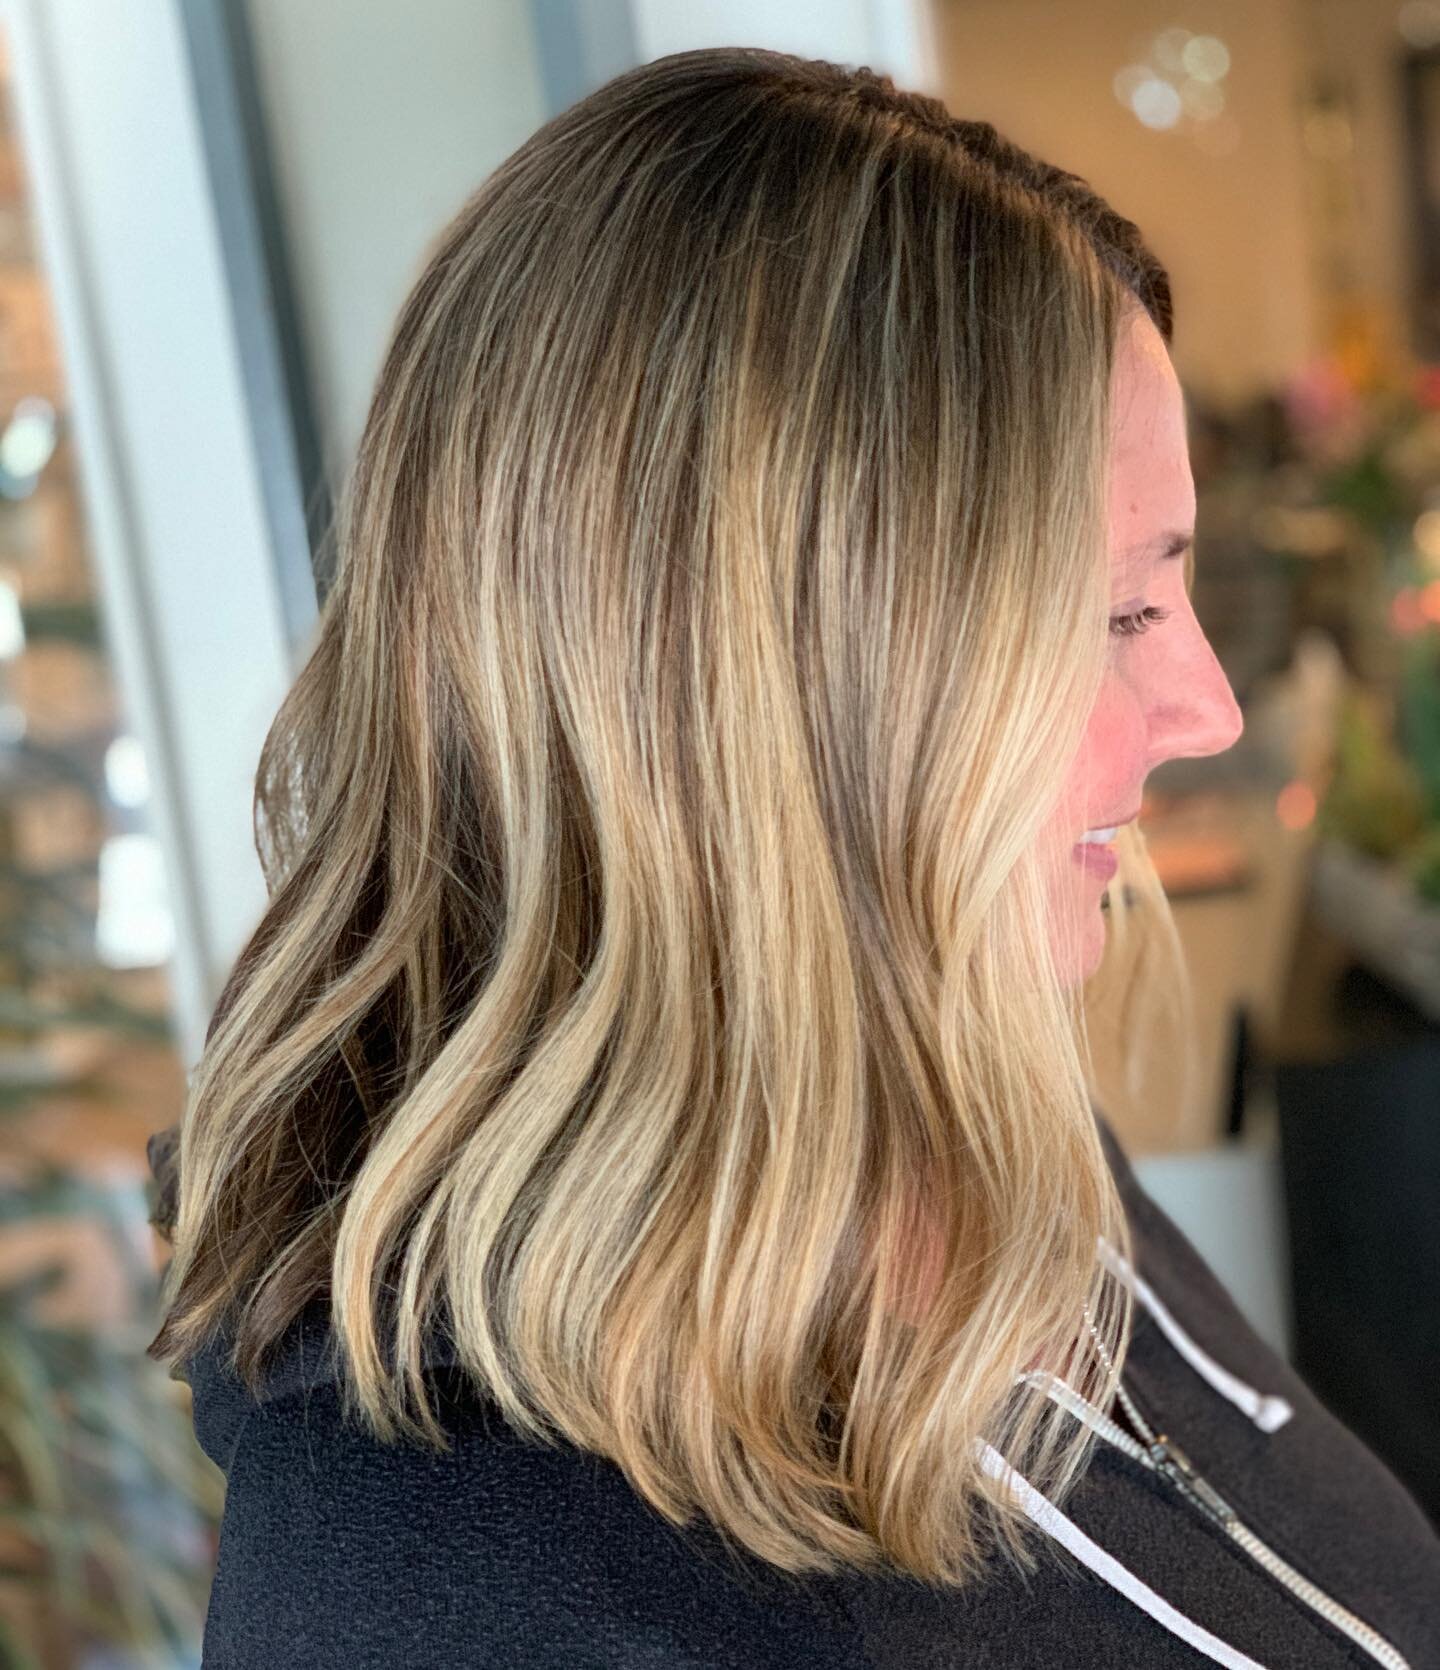 Oh @eshabs sure is a 💎 ✨I love spending hours with you 😊 hair inspo by another gem, @allypapp #oribeobsessed #lorealprous #hairinspo #marinasf #marinahairstylist #diaus #blondstudio  #hairgoals #sfhairstylist #sfbalayage #sunkissed #lpartist #sfhai